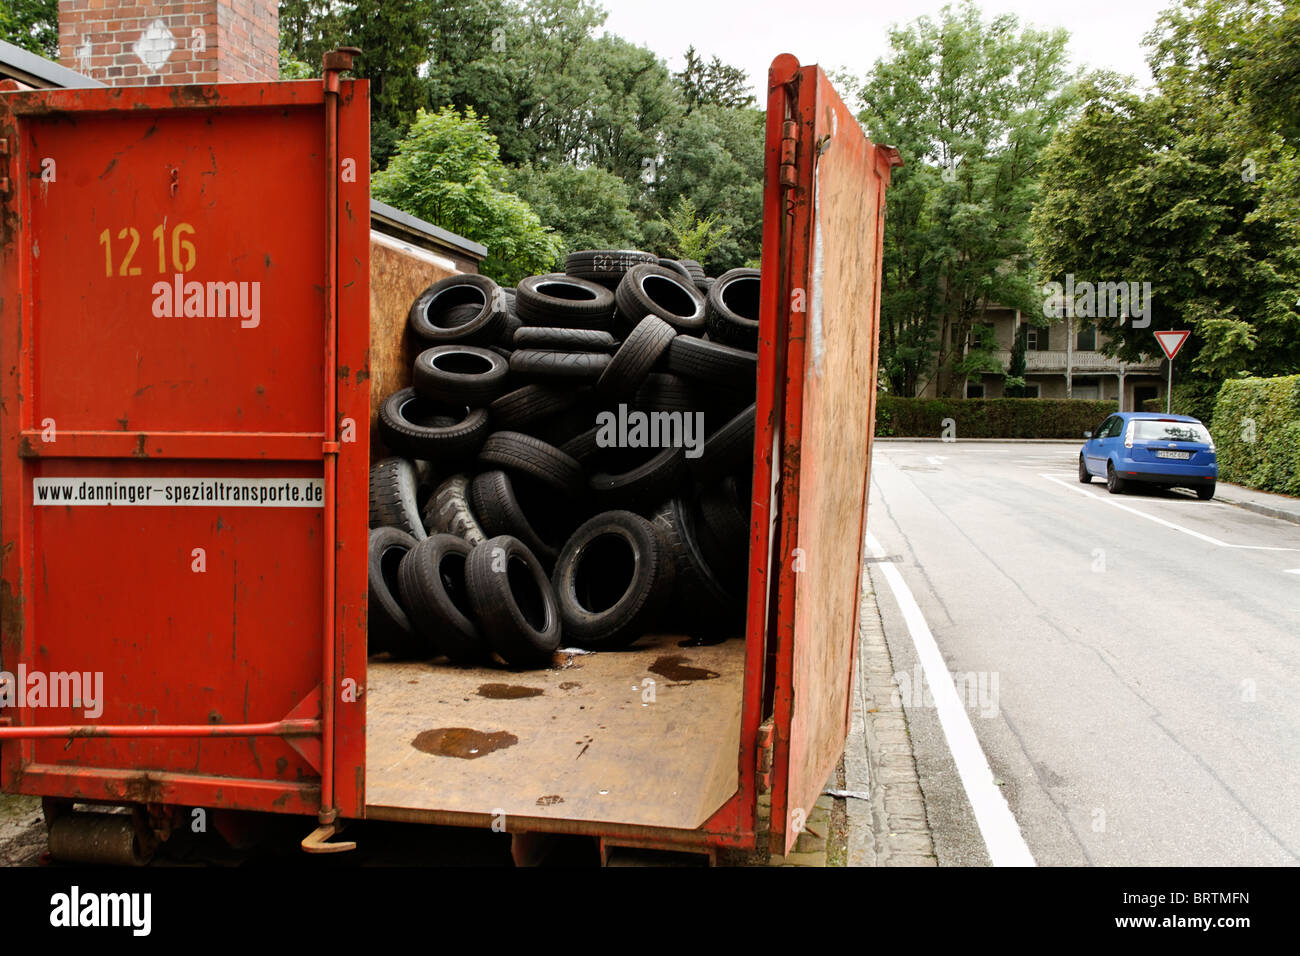 Old Rubber Car and Truck Tyers in Container Stock Photo